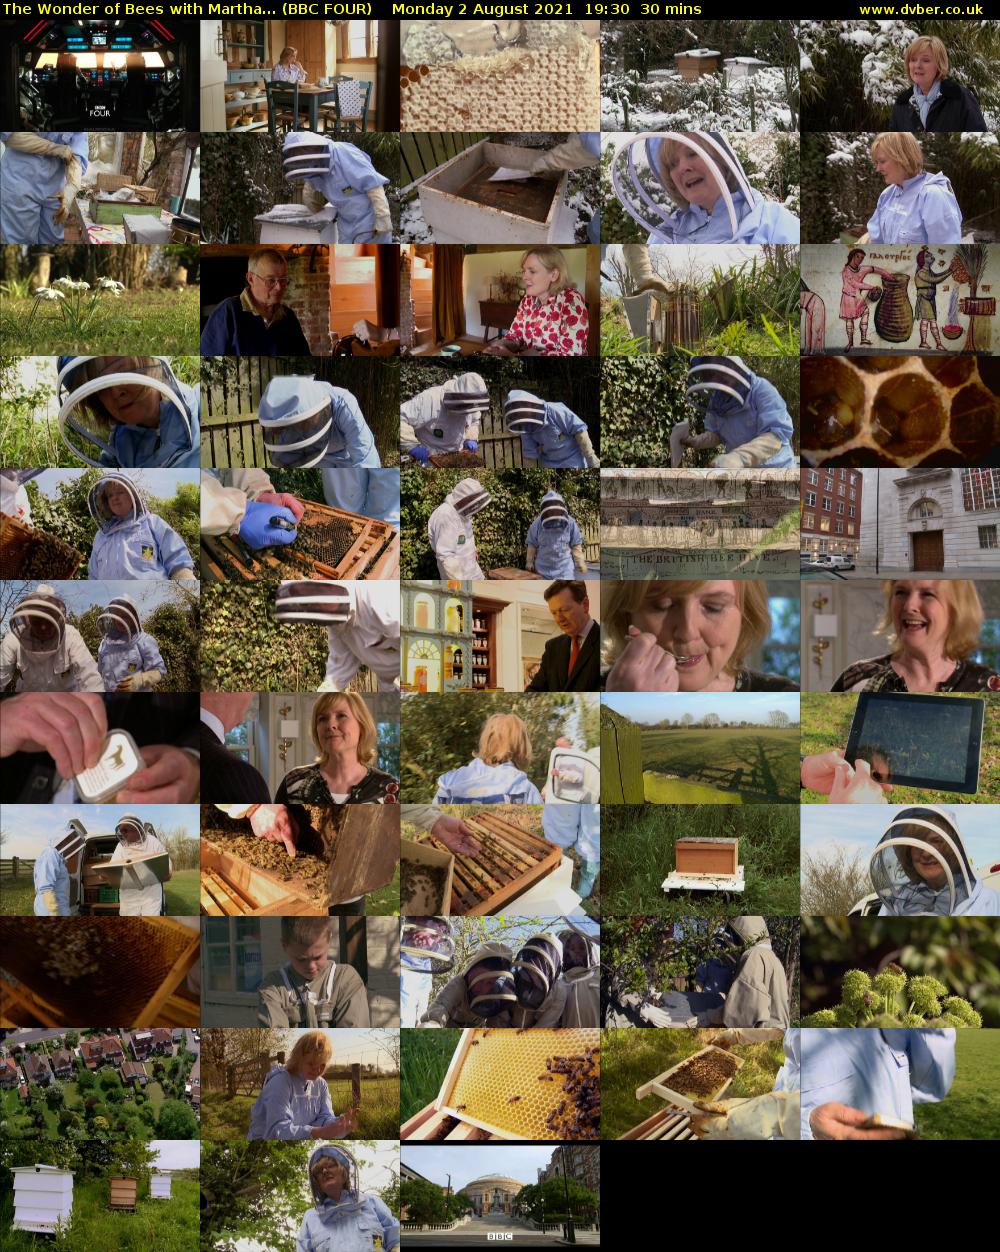 The Wonder of Bees with Martha... (BBC FOUR) Monday 2 August 2021 19:30 - 20:00